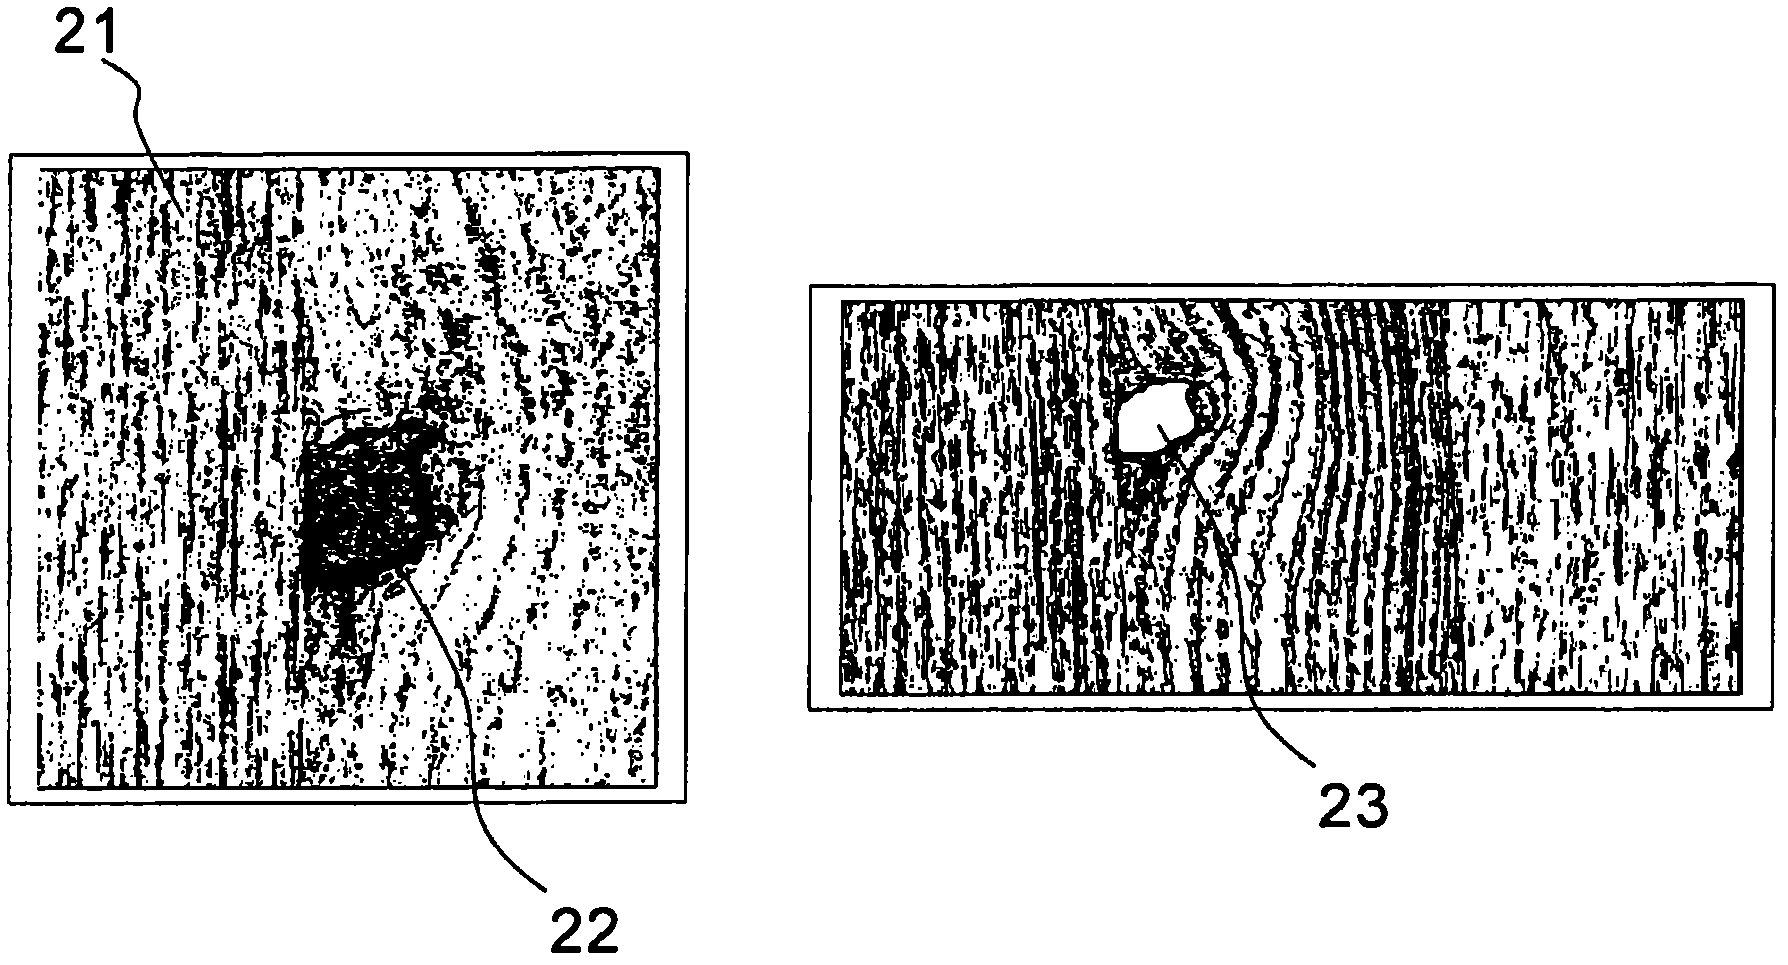 Automatic repair of flat, textured objects, such as wood panels having aesthetic reconstruction